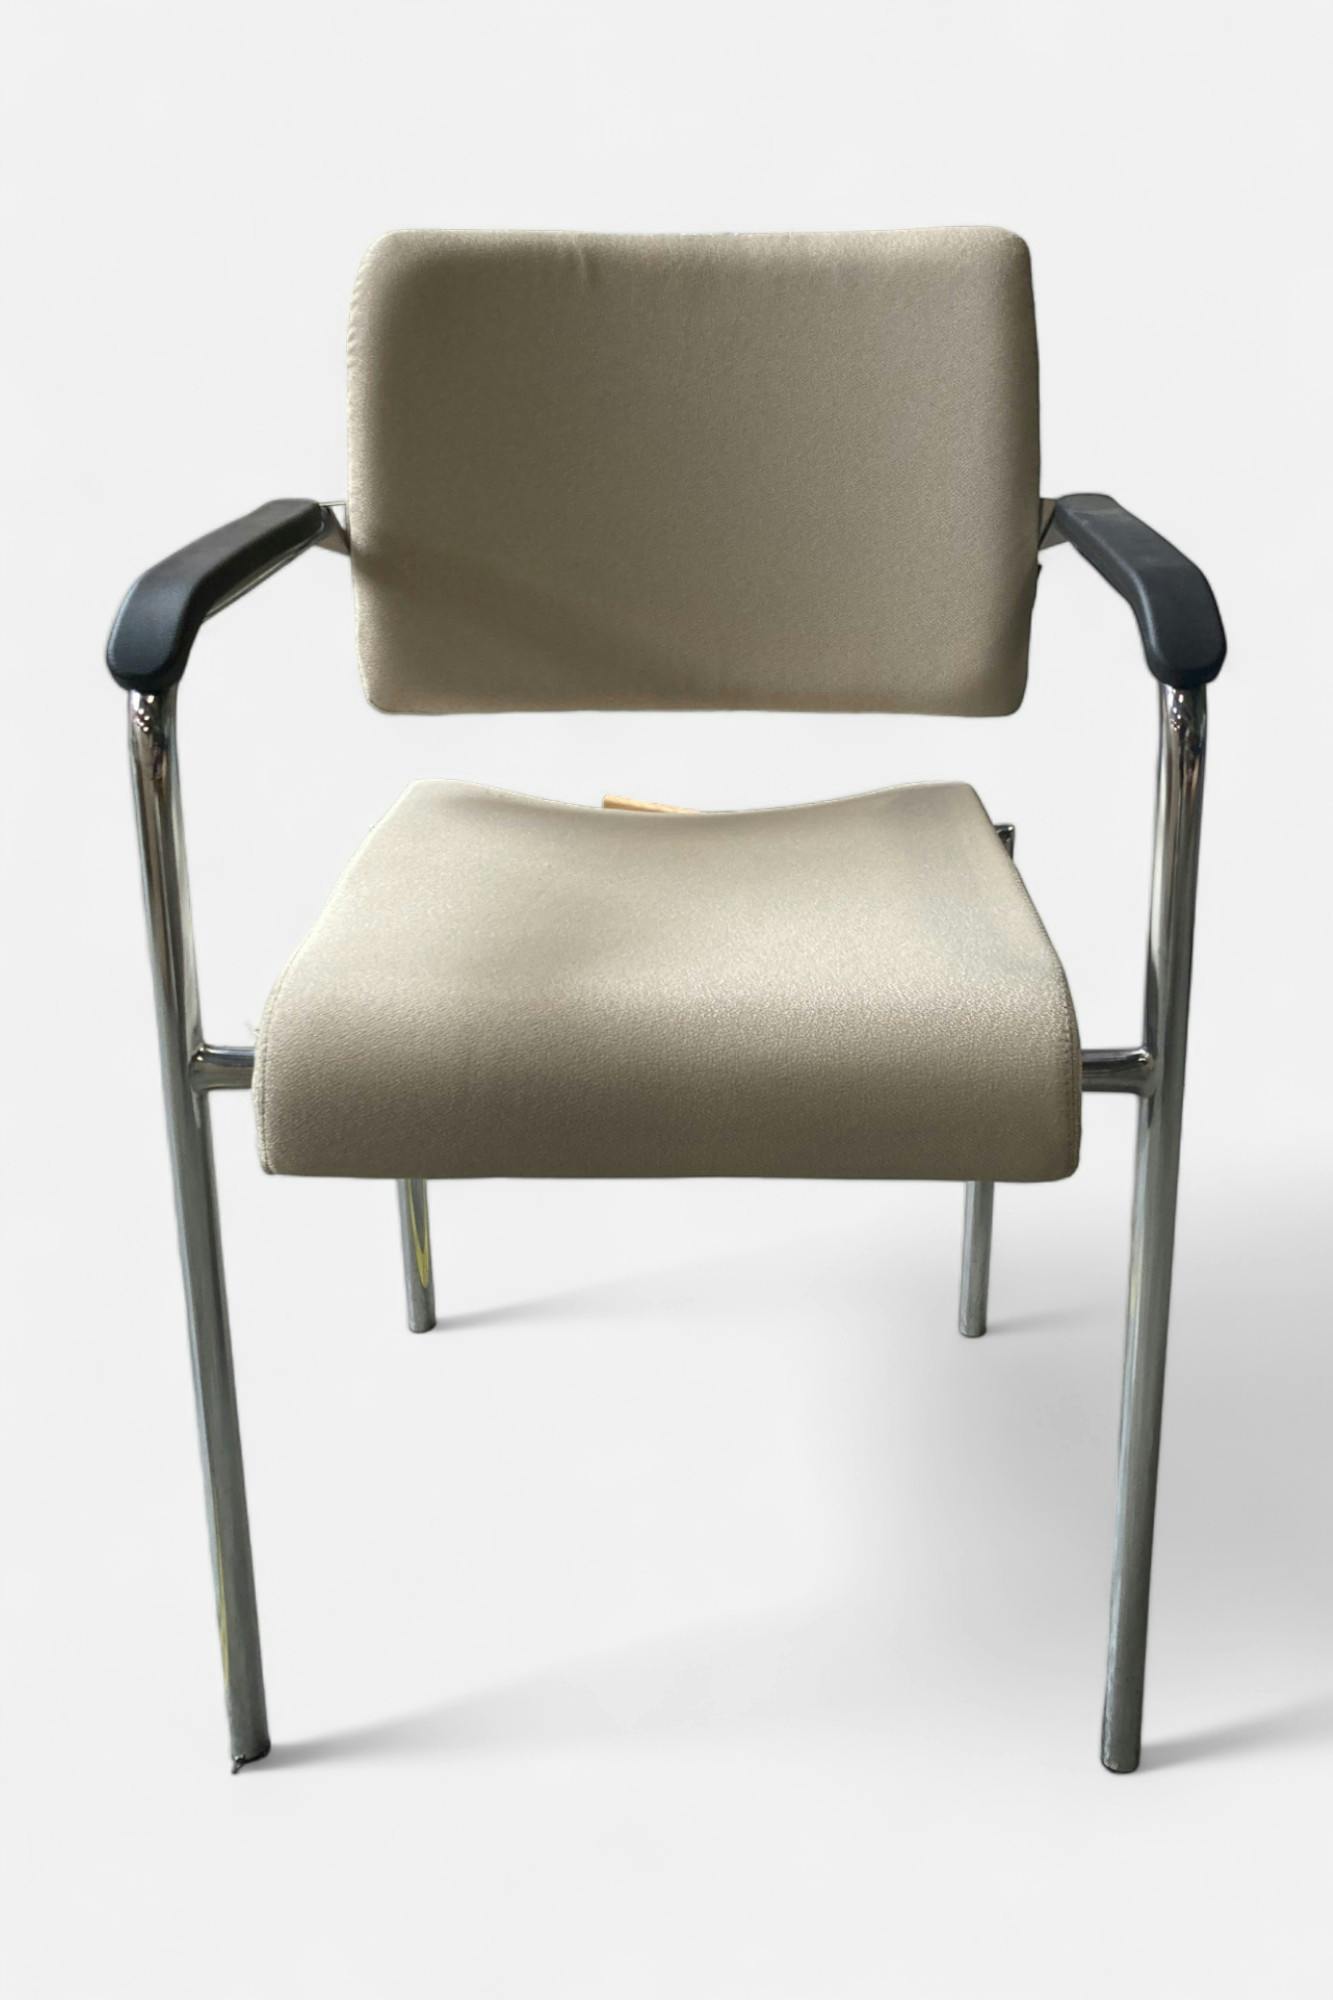 DROMEAS Porto model beige Visitor chair with black armrests - Relieve Furniture